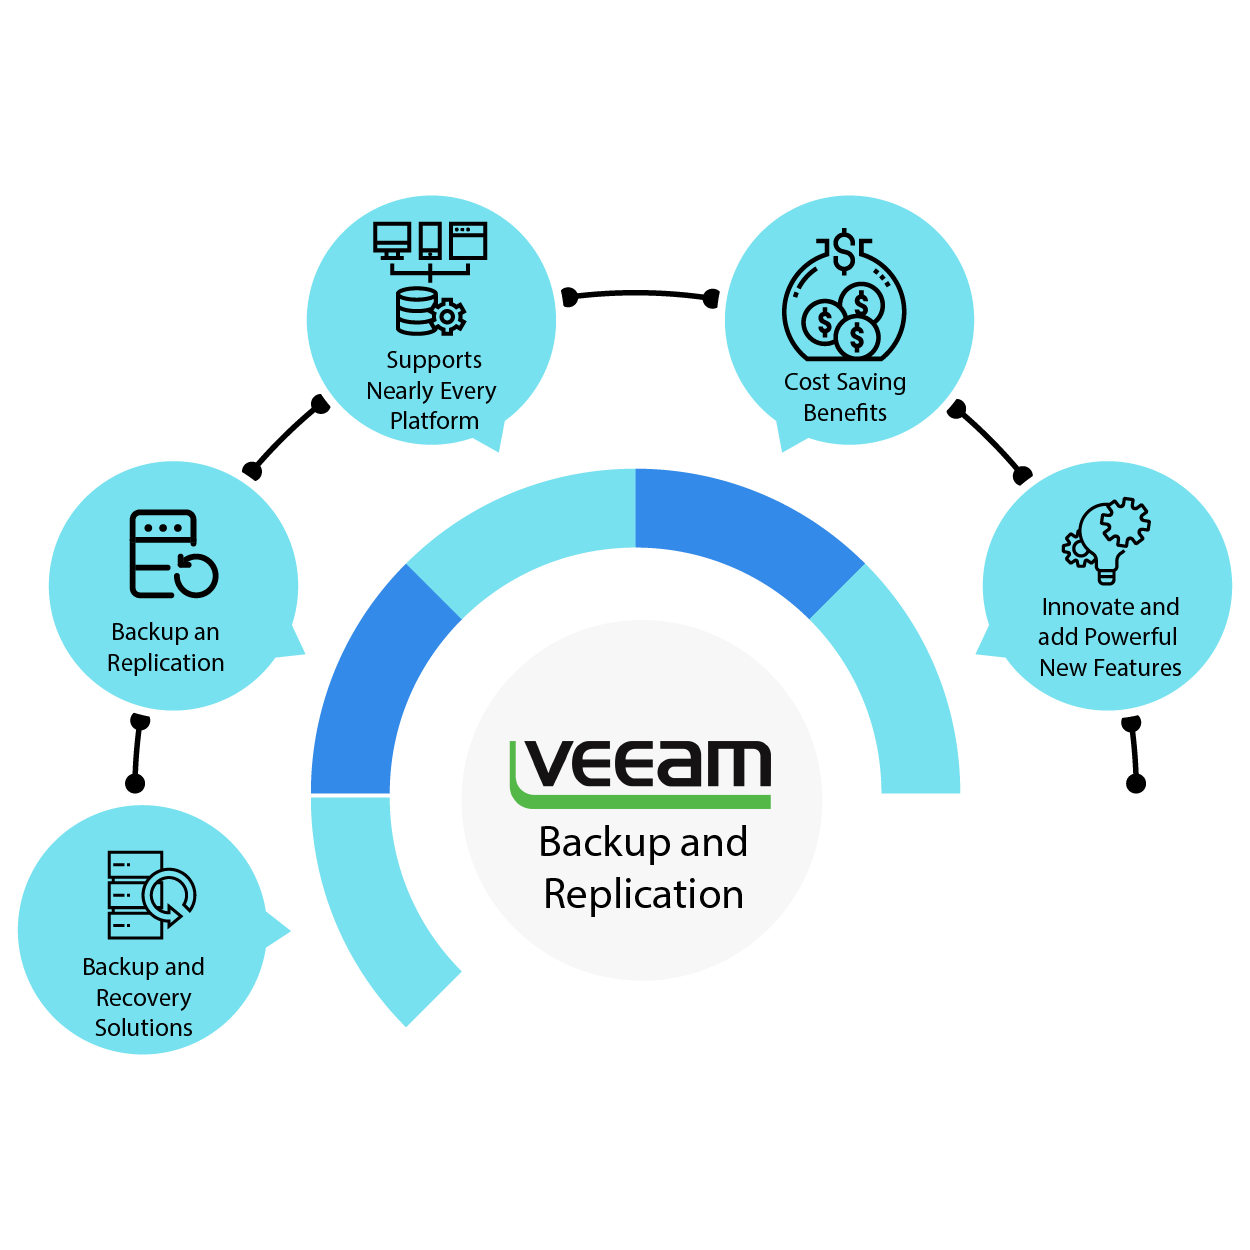 Five Reasons to Choose Veeam for your Data Backup and Recovery